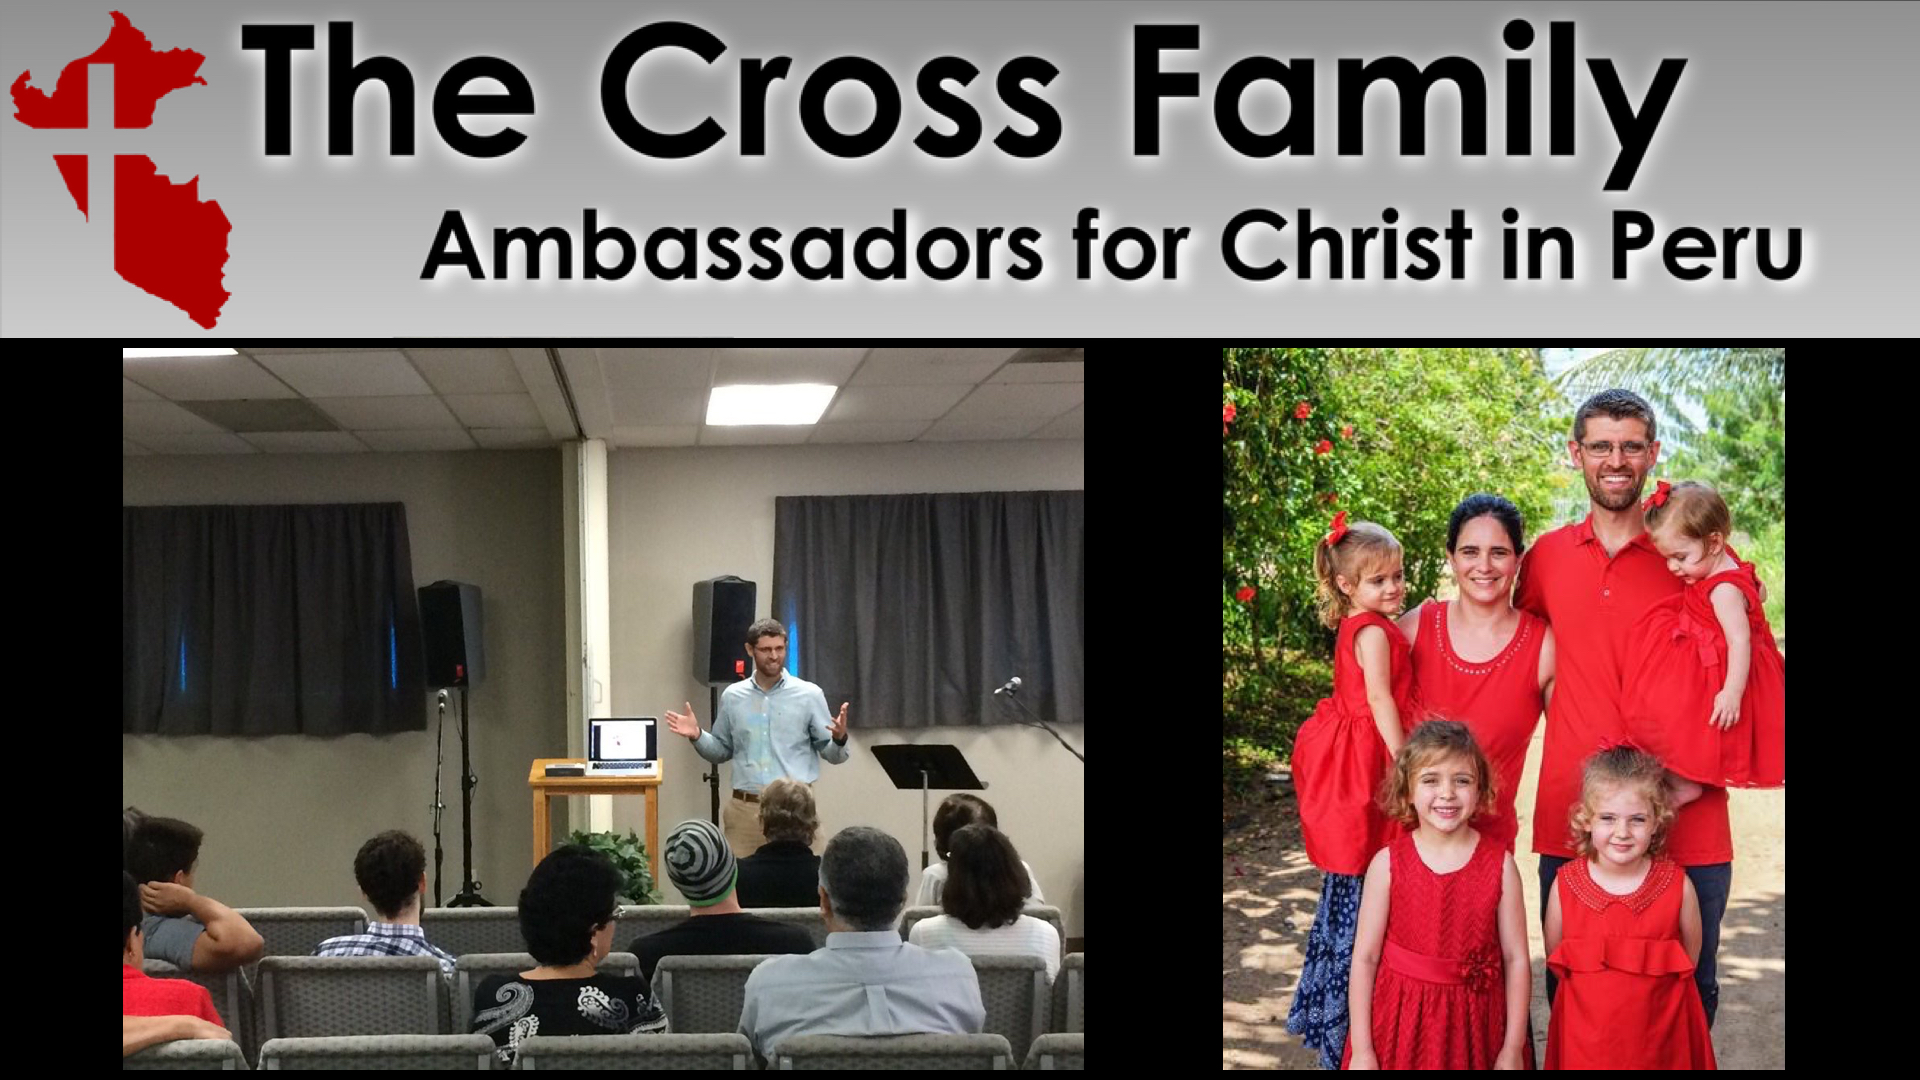  SERVING CHRIST ALONGSIDE OF LOCAL CHRISTIANS SO THAT INDIGENOUS, REPRODUCING CHURCHES ARE A CONTINUAL REALITY IN PUERTO MALDONADO, PERU AND BEYOND. "Therefore, we are ambassadors for Christ, as though God were making an appeal through us; we beg y